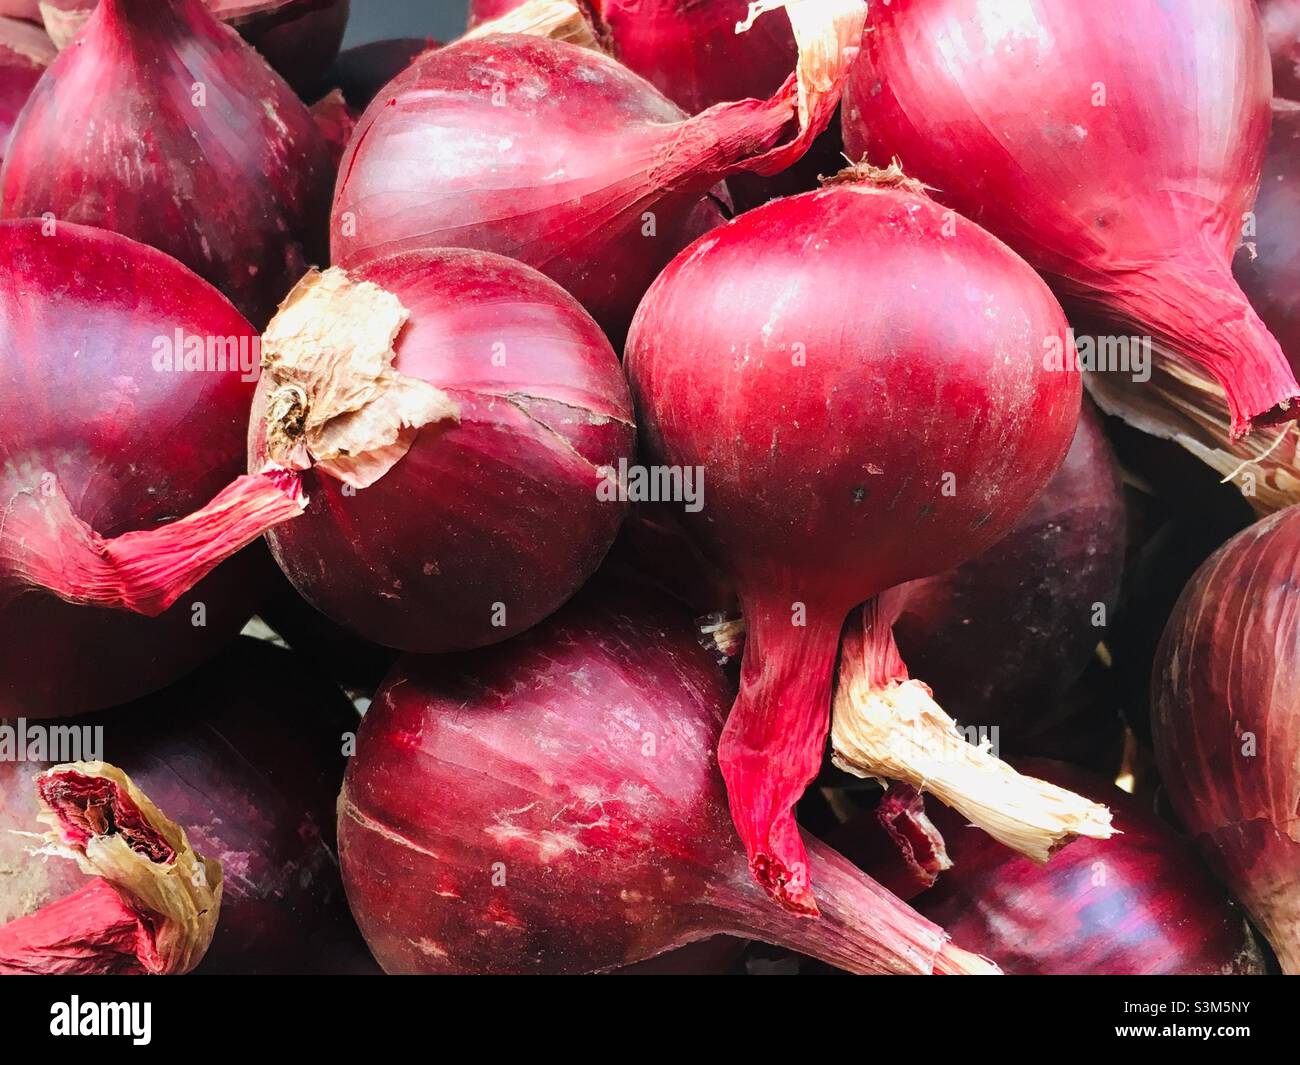 Home grown organic red onions Stock Photo